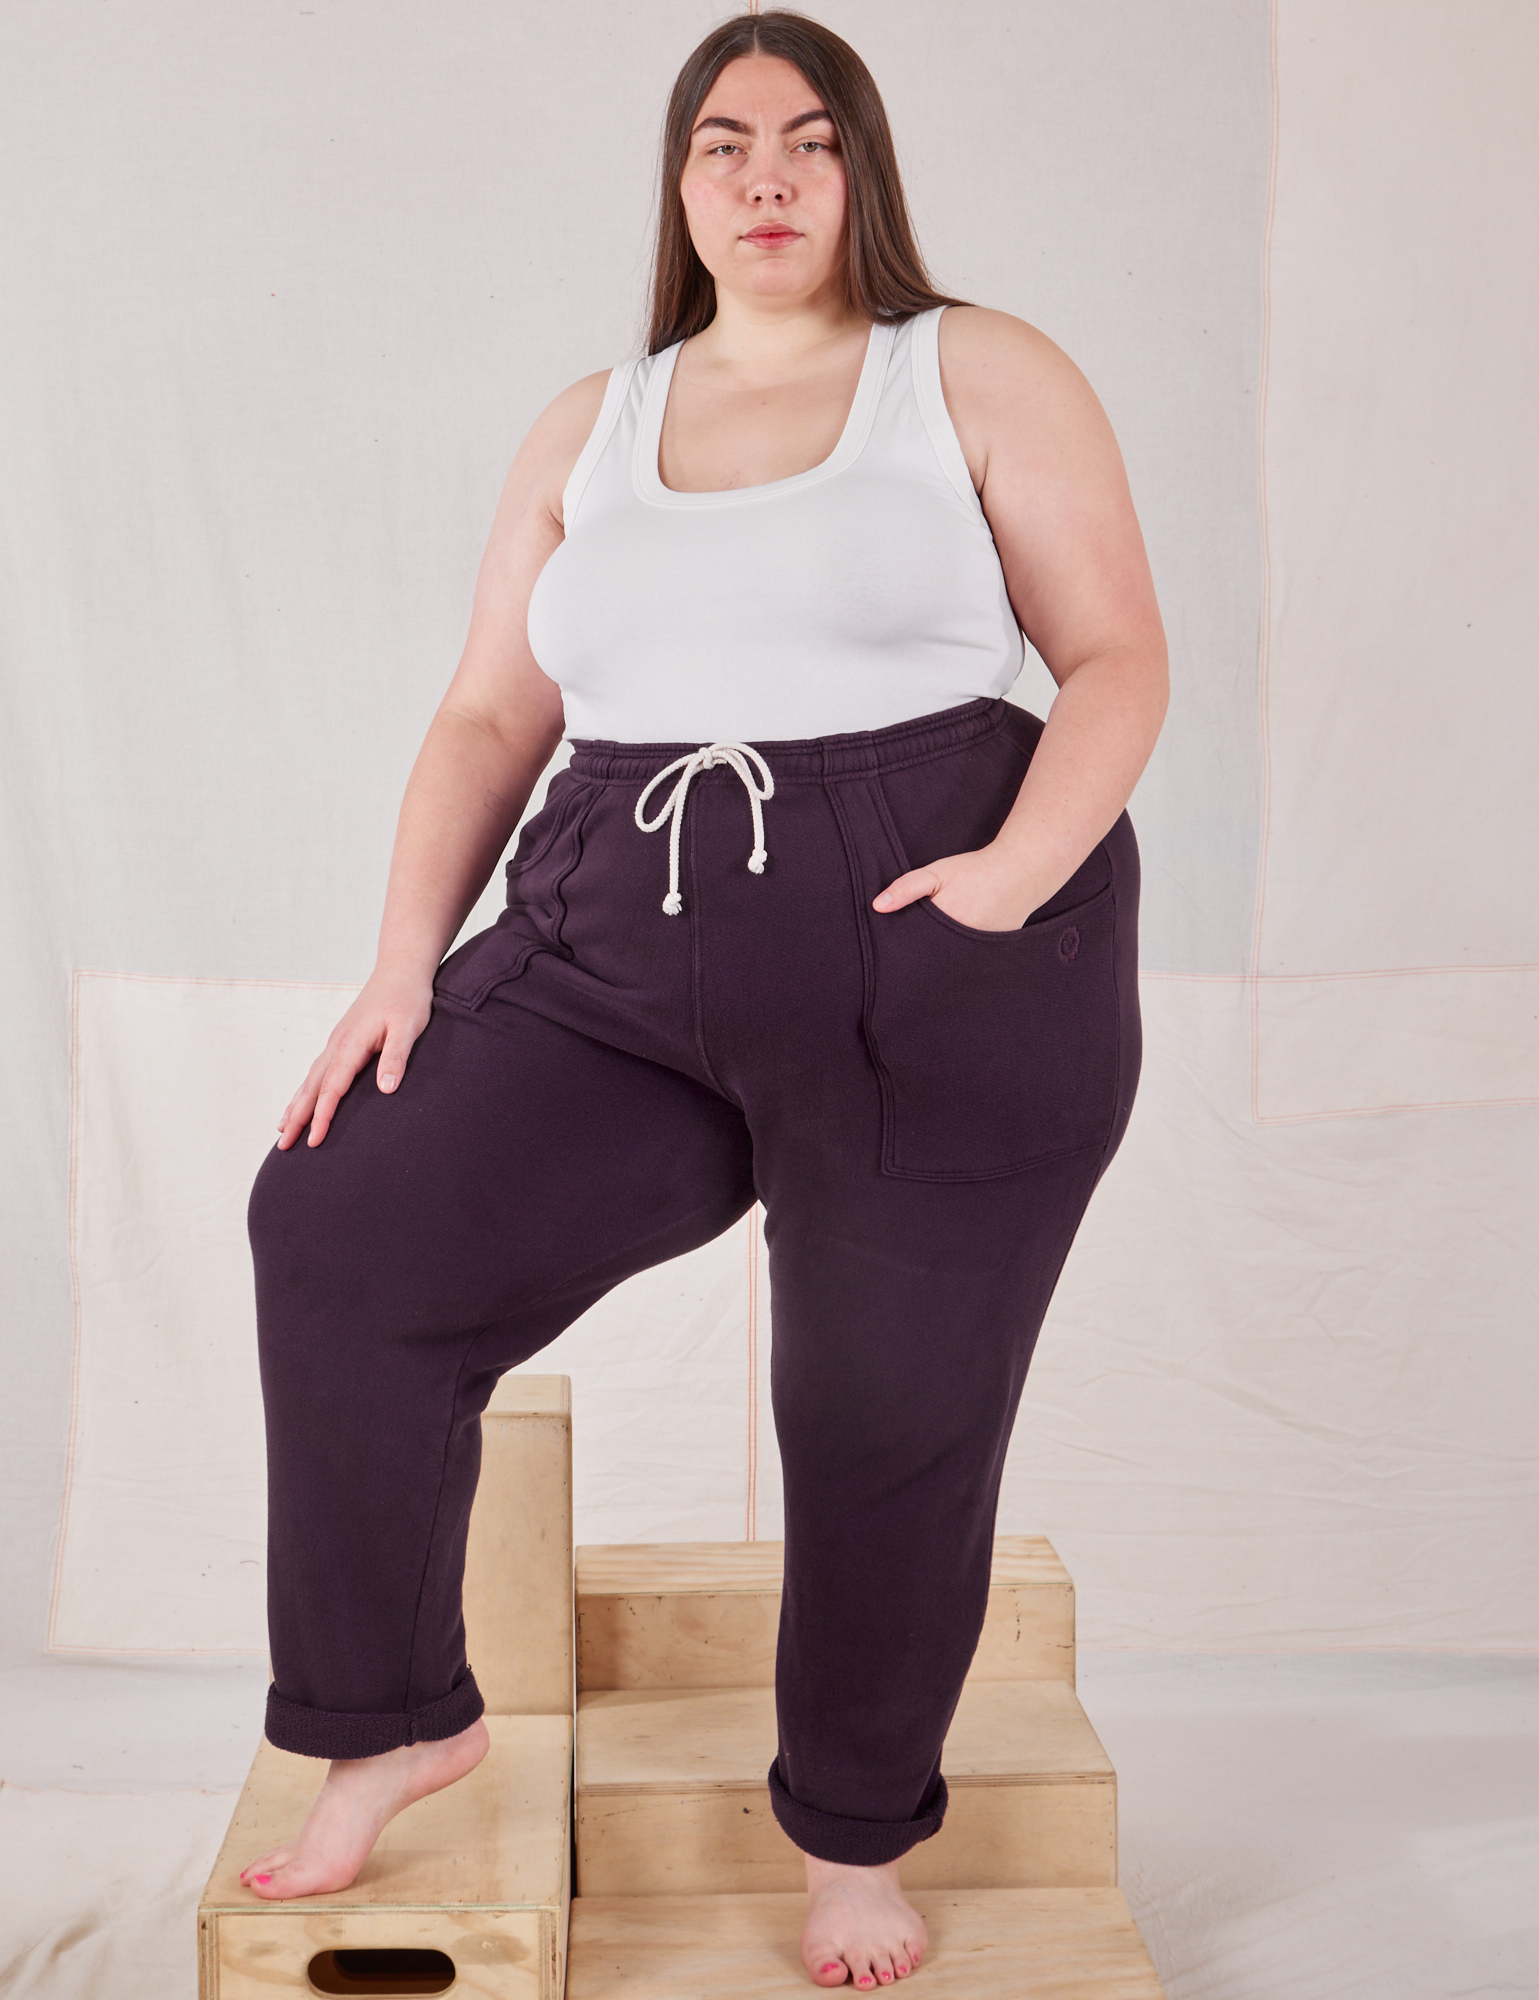 Marielena is 5&#39;8&quot; and wearing 1XL Rolled Cuff Sweat Pants in Nebula Purple paired with Cropped Tank in vintage tee off-white